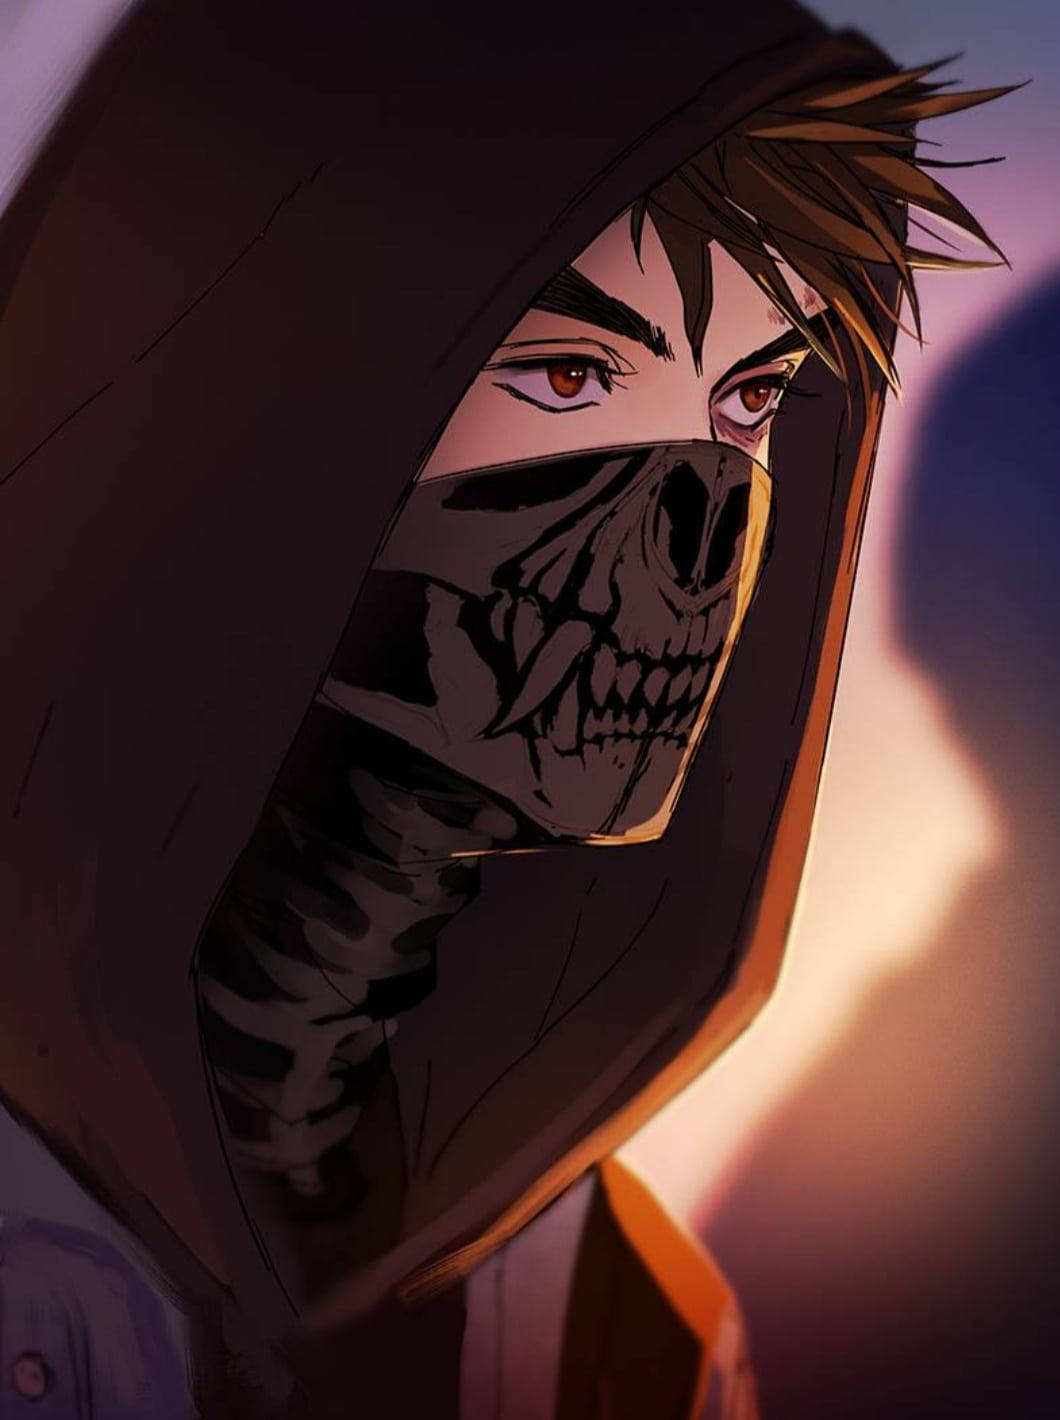 Cool Boy Anime With Skull Mask Wallpaper